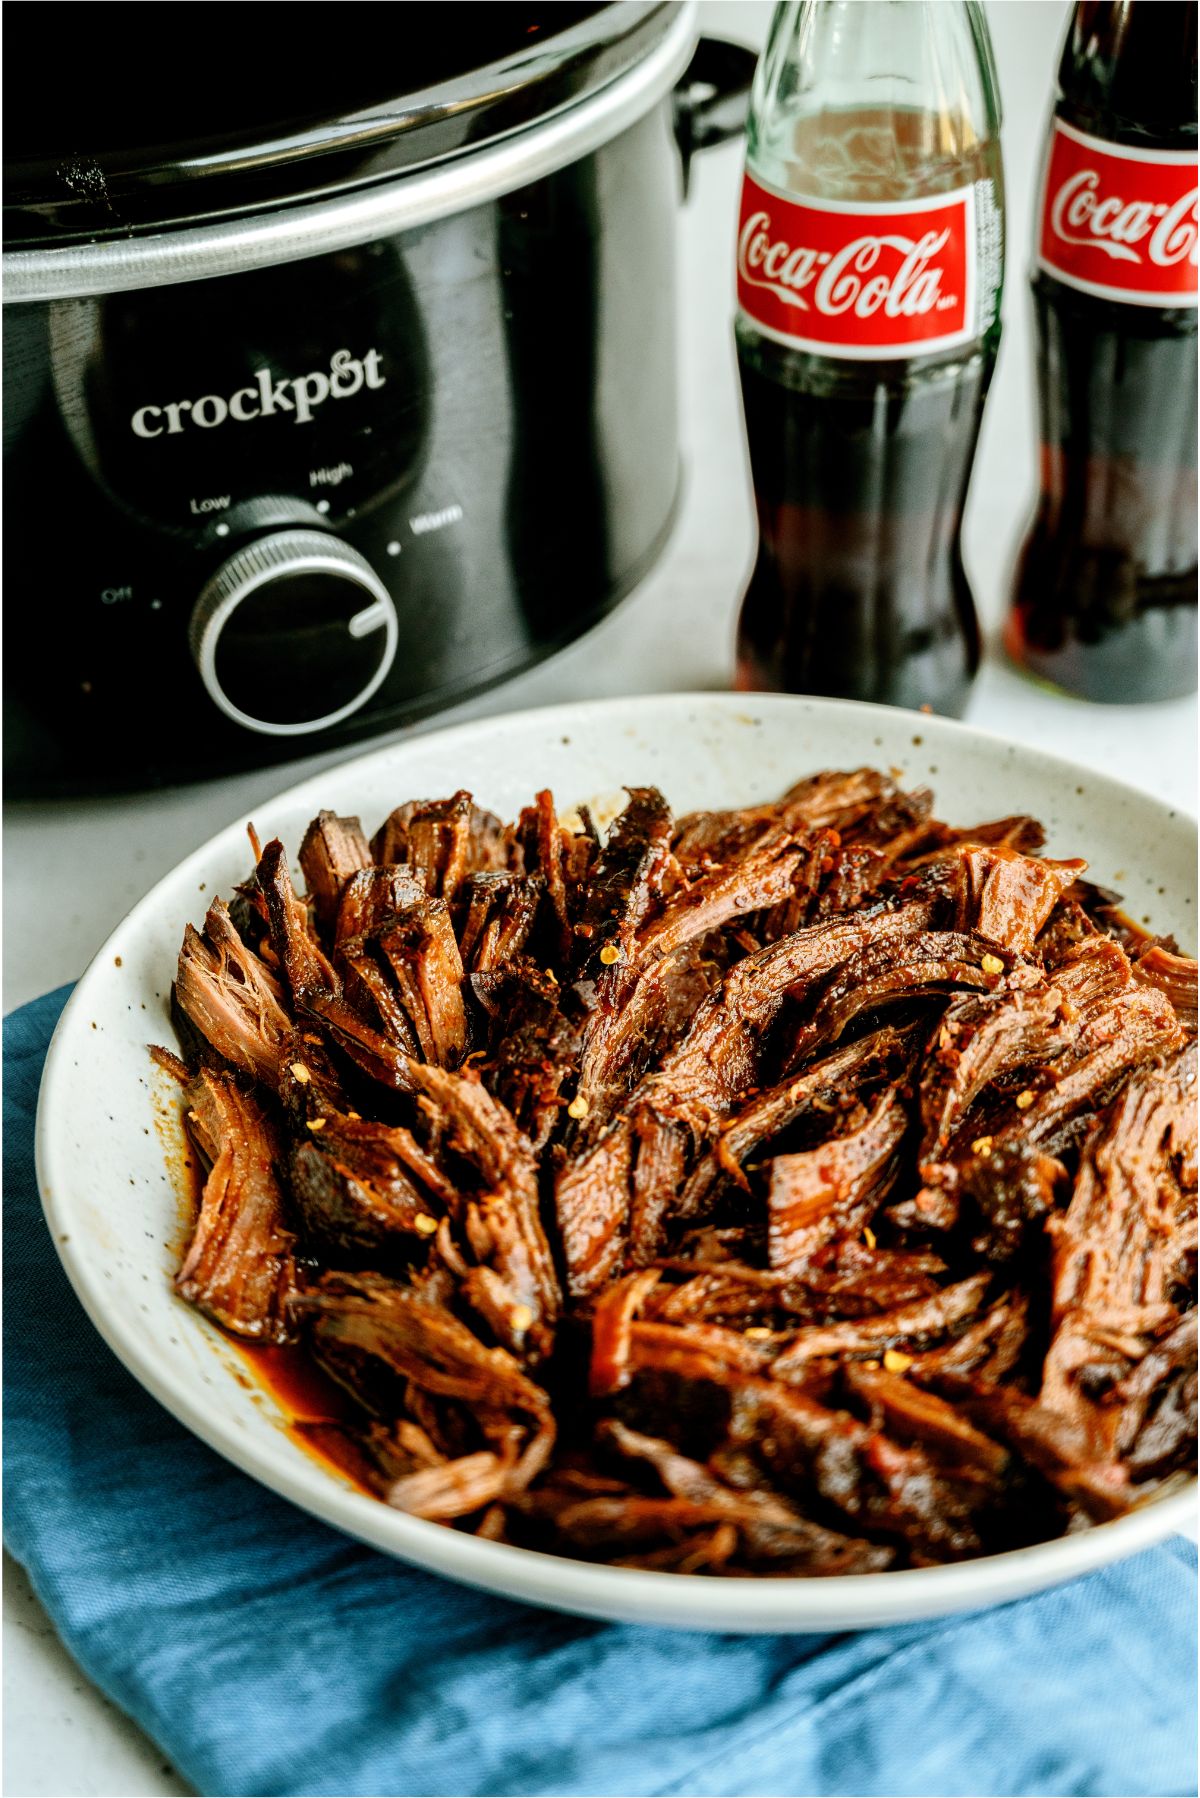 Slow Cooker Cola BBQ Roast Beef on a serving platter with a slow cooker and 2 bottles of coke in the background